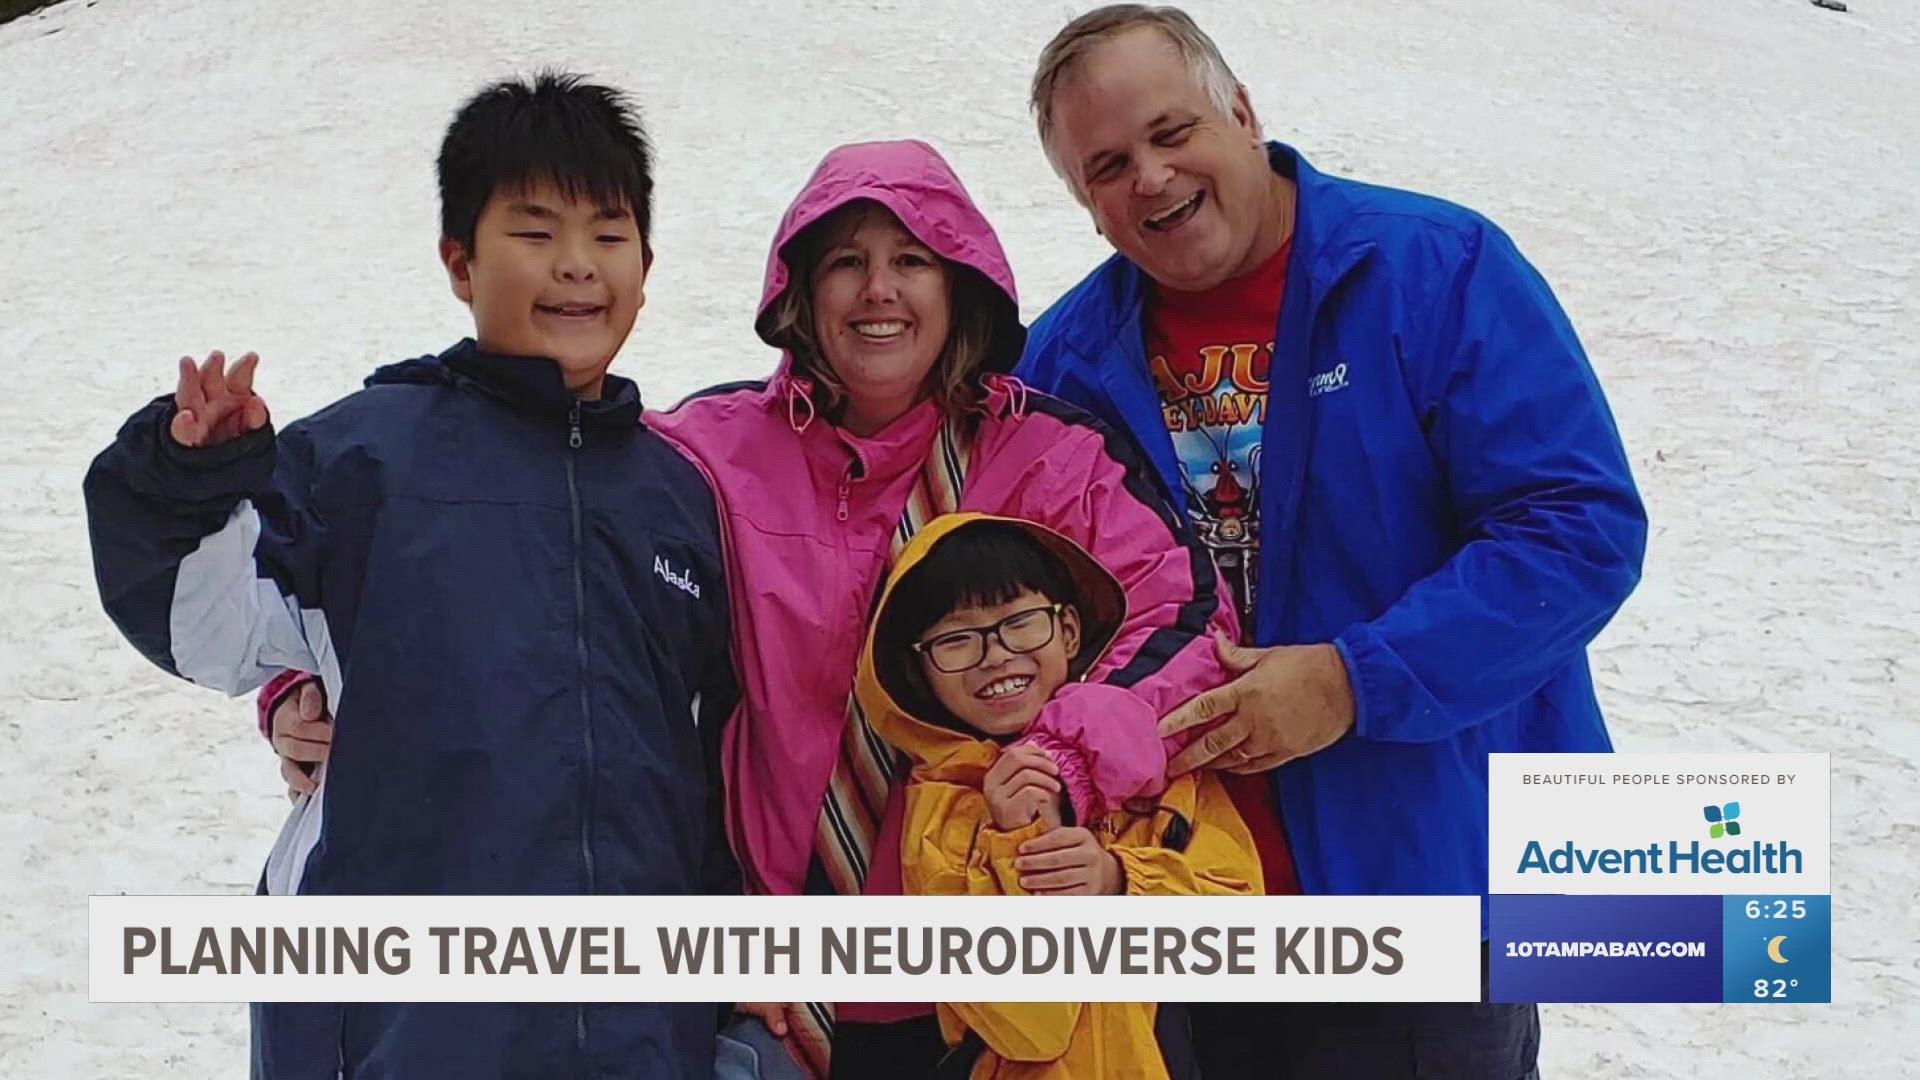 Jenifer Breaux and her husband have two neurodiverse children and they travel a lot. Now, she's hoping to make travel possible for all families.